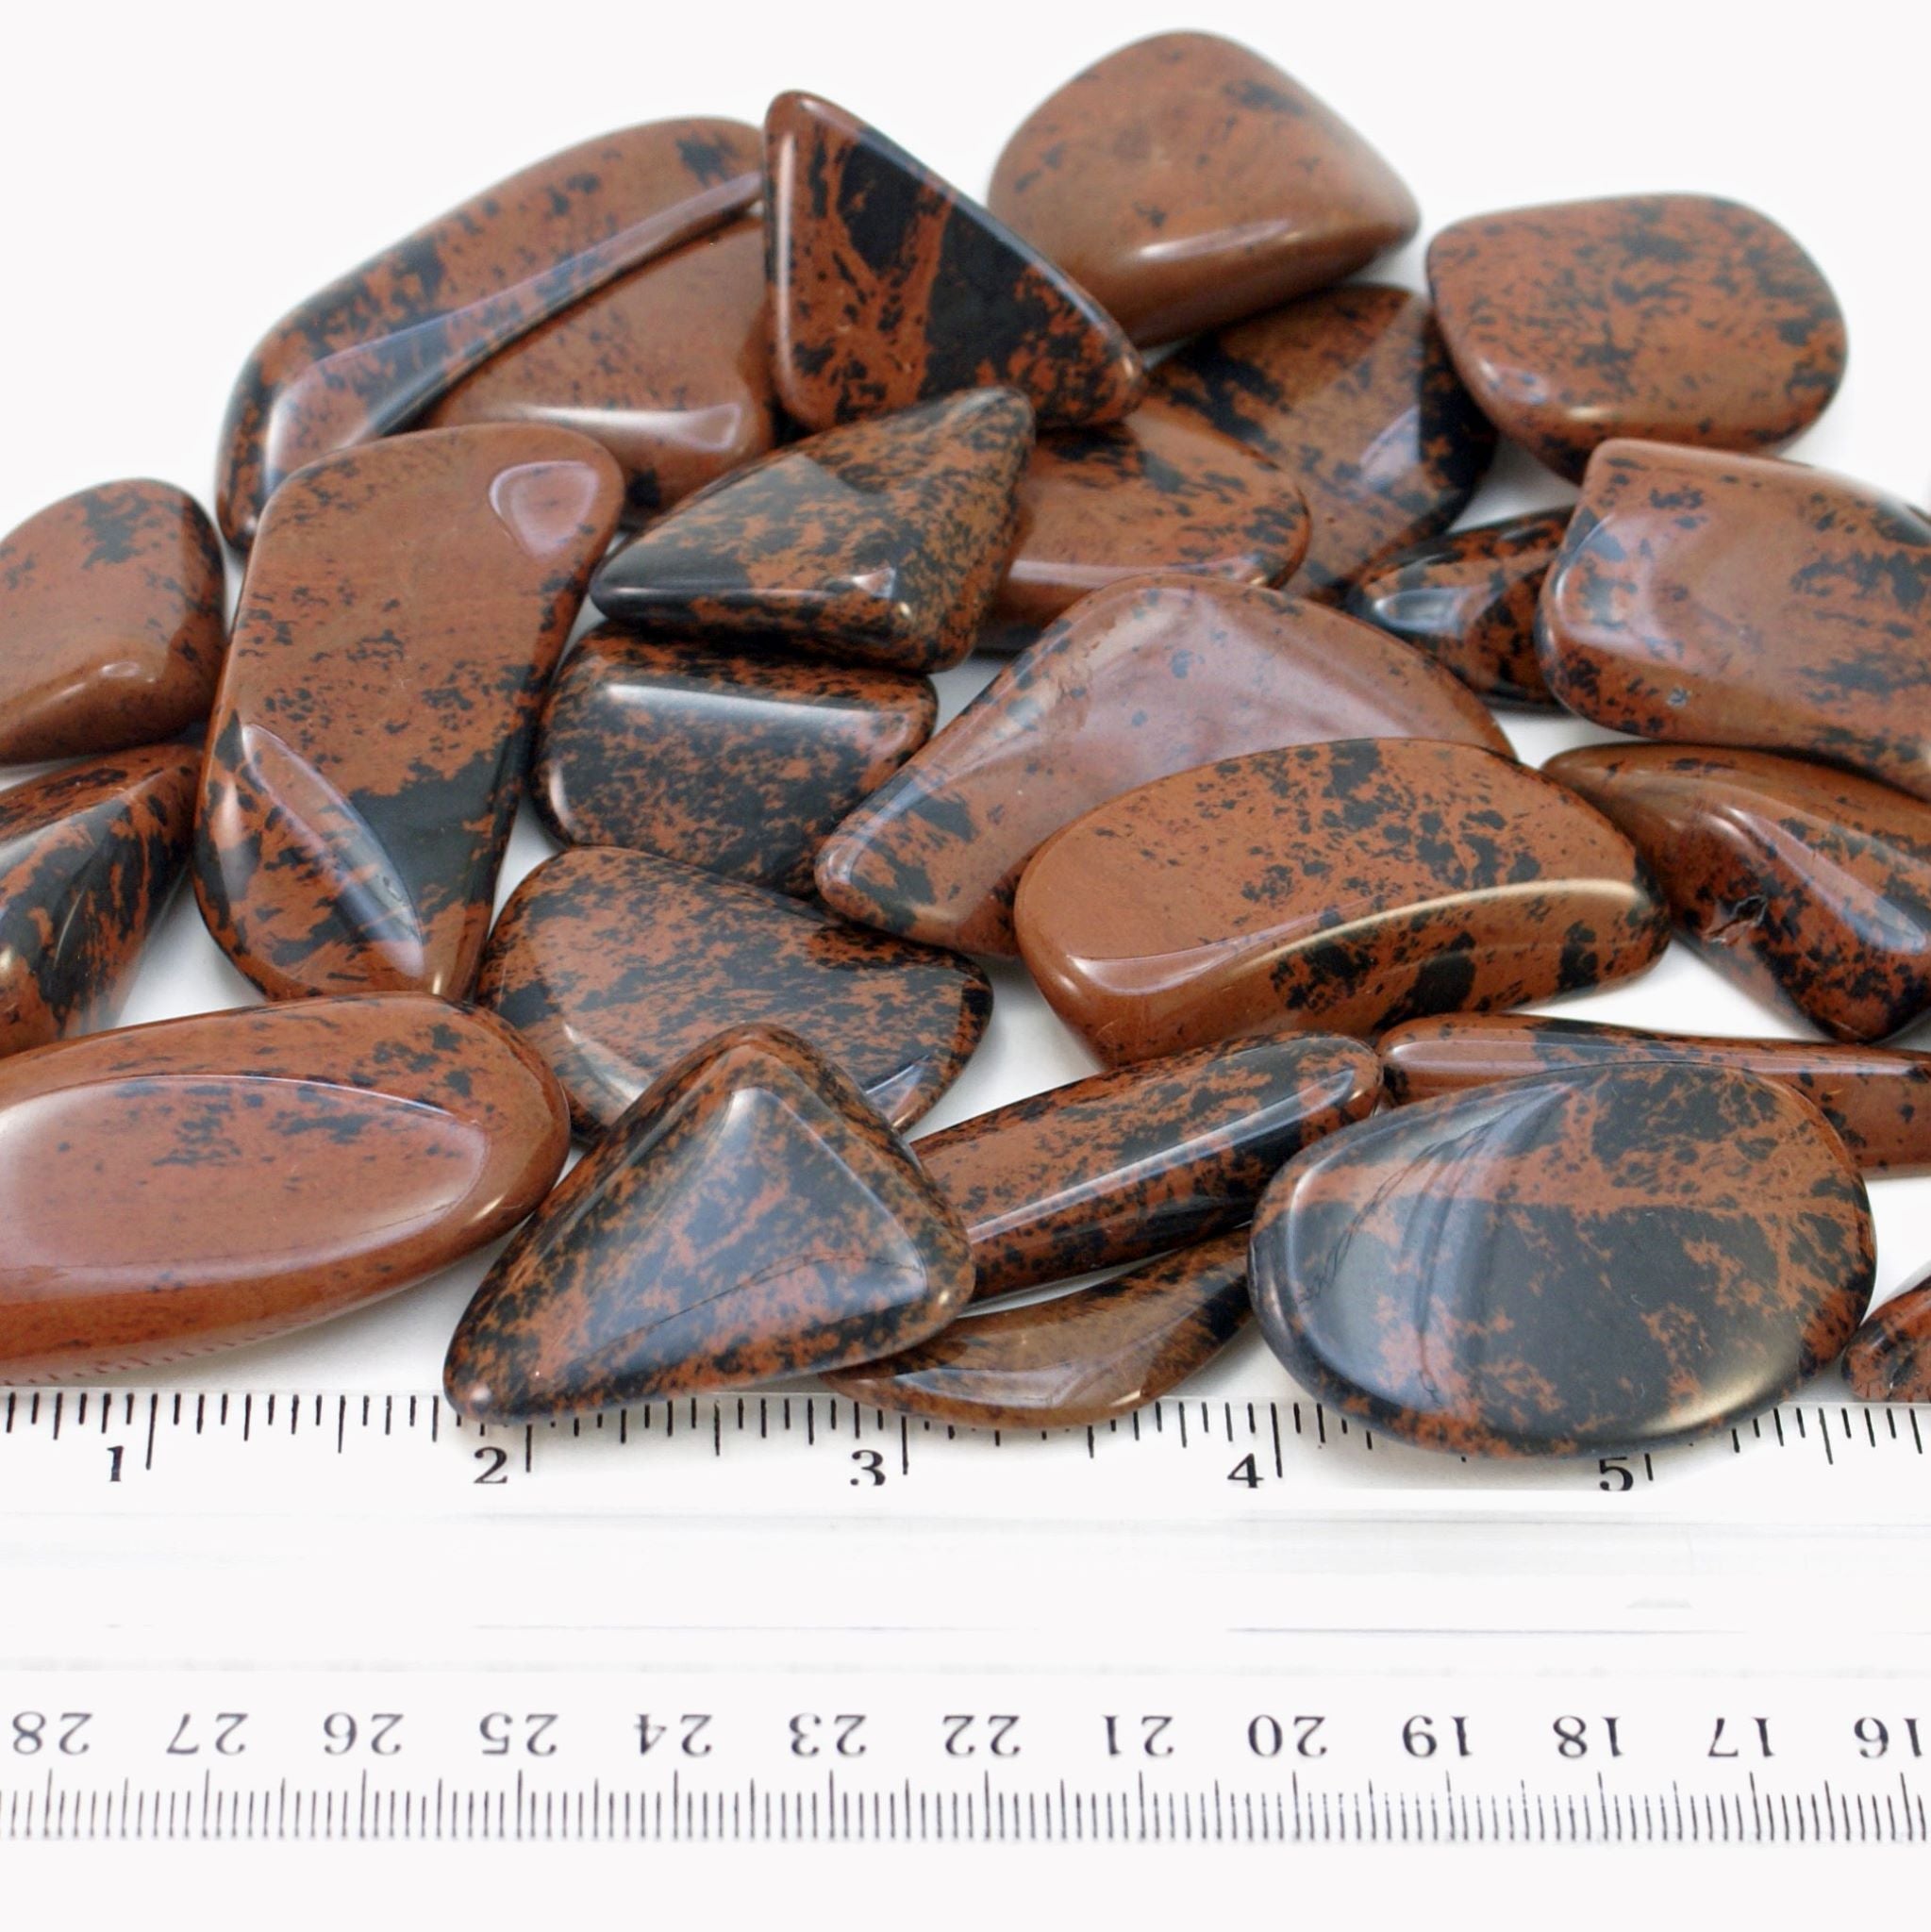 Close-up of tumbled mahogany obsidian stones with ruler